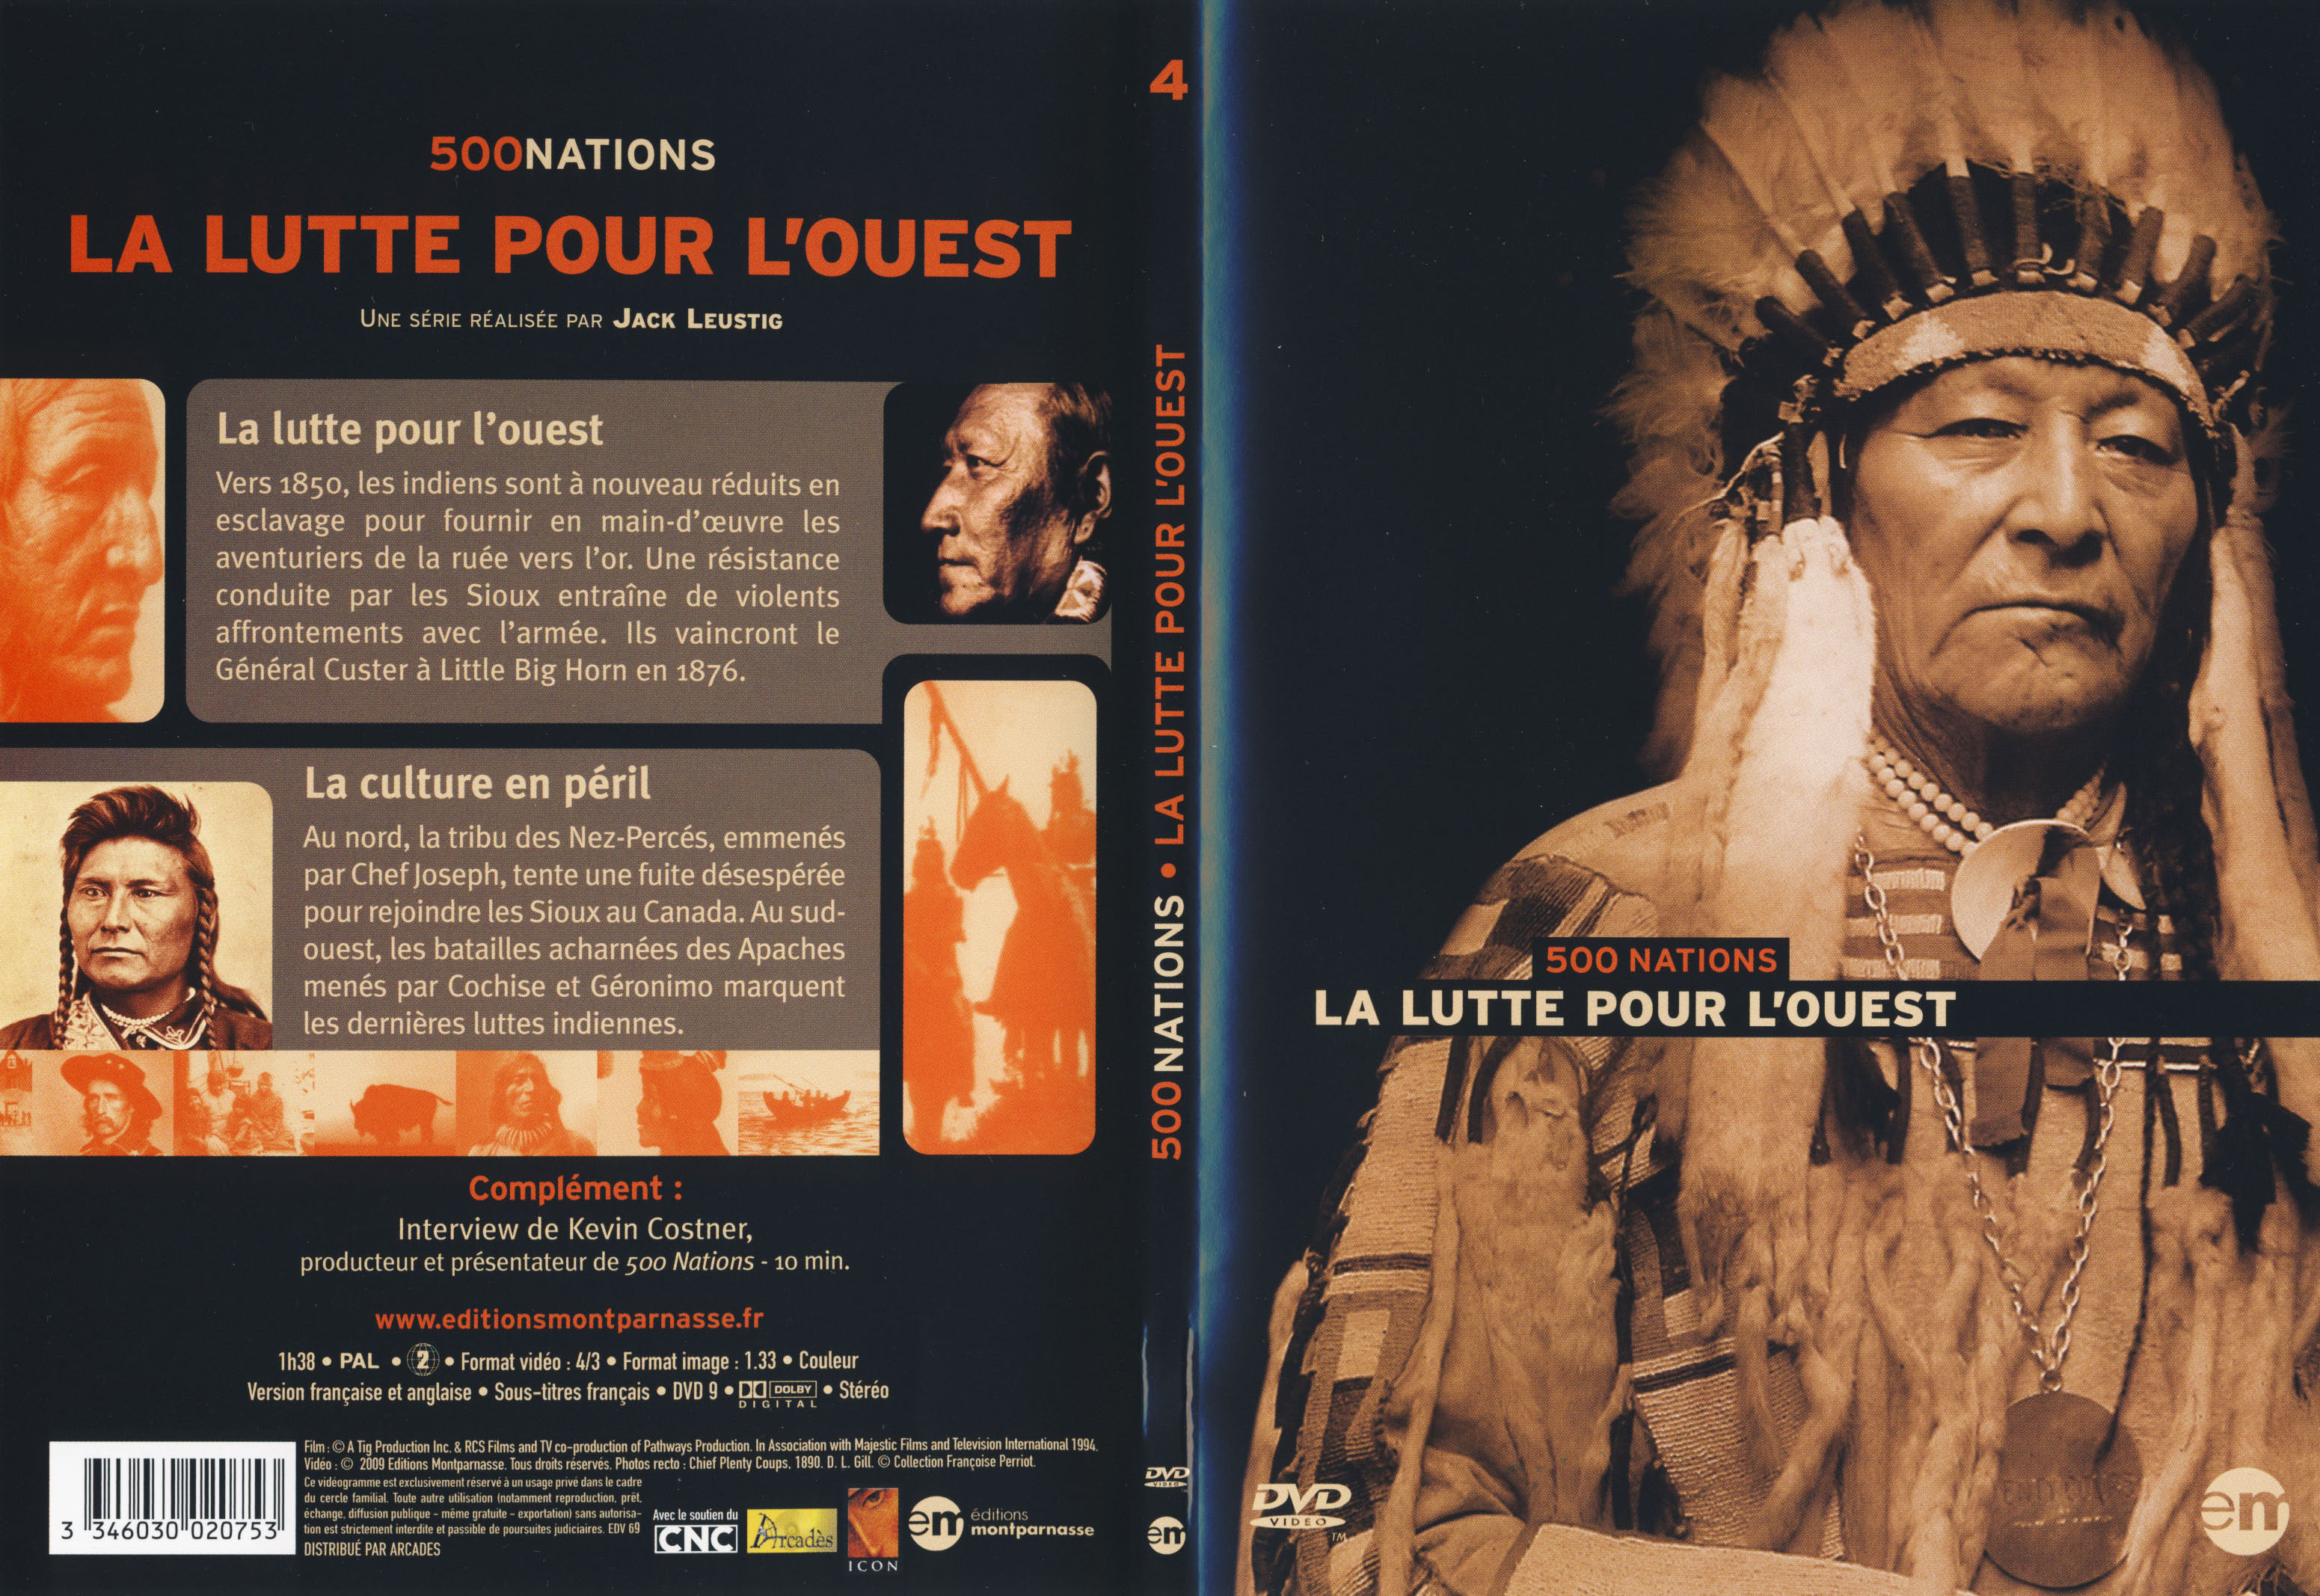 Jaquette DVD 500 nations DVD 4